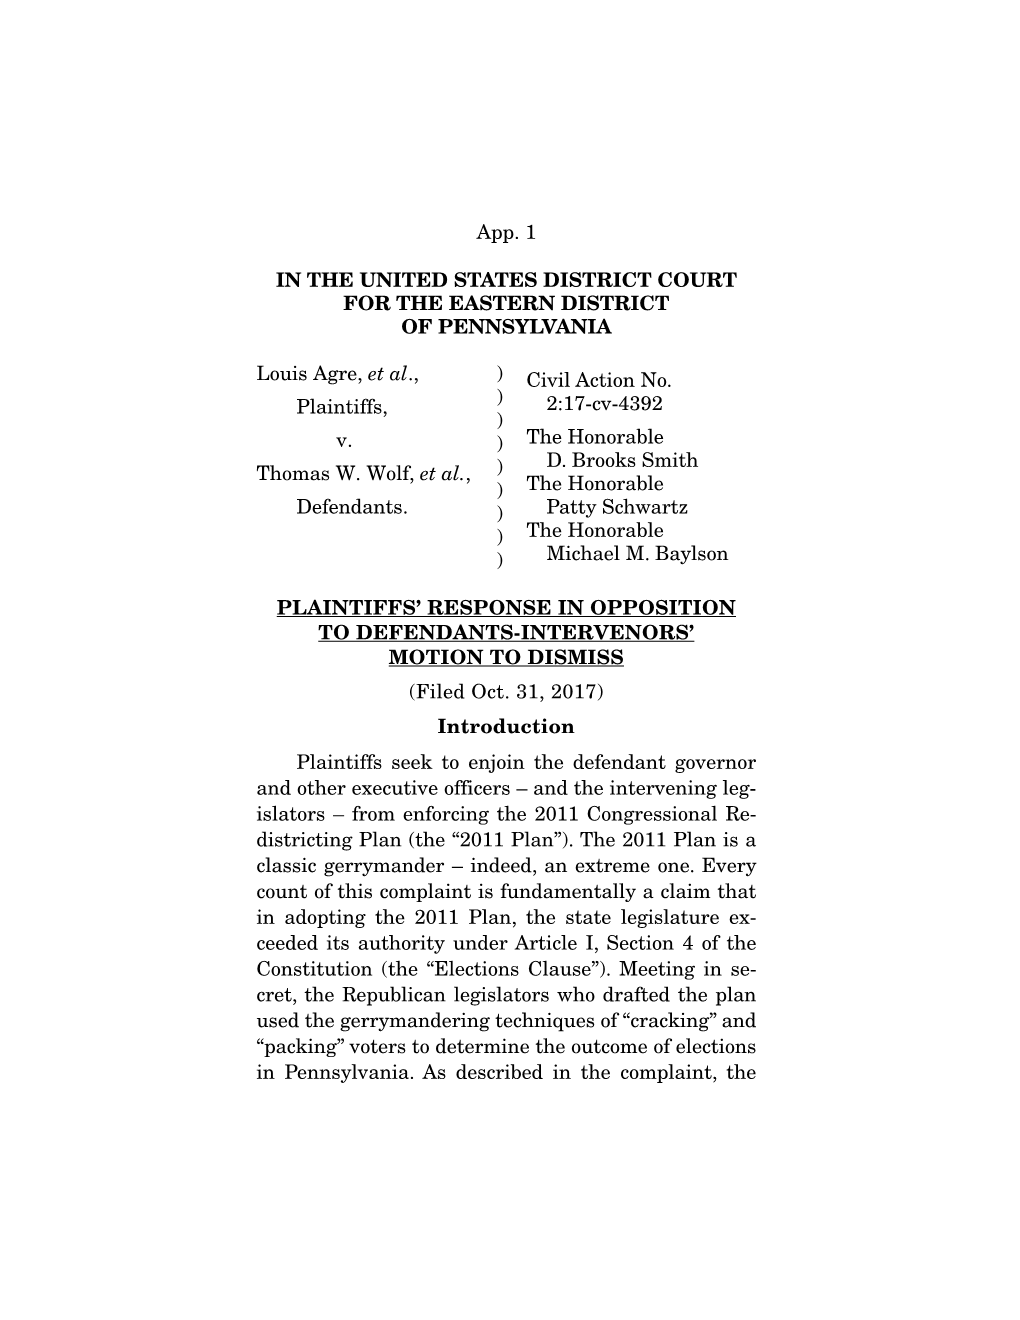 App. 1 in the UNITED STATES DISTRICT COURT for THE